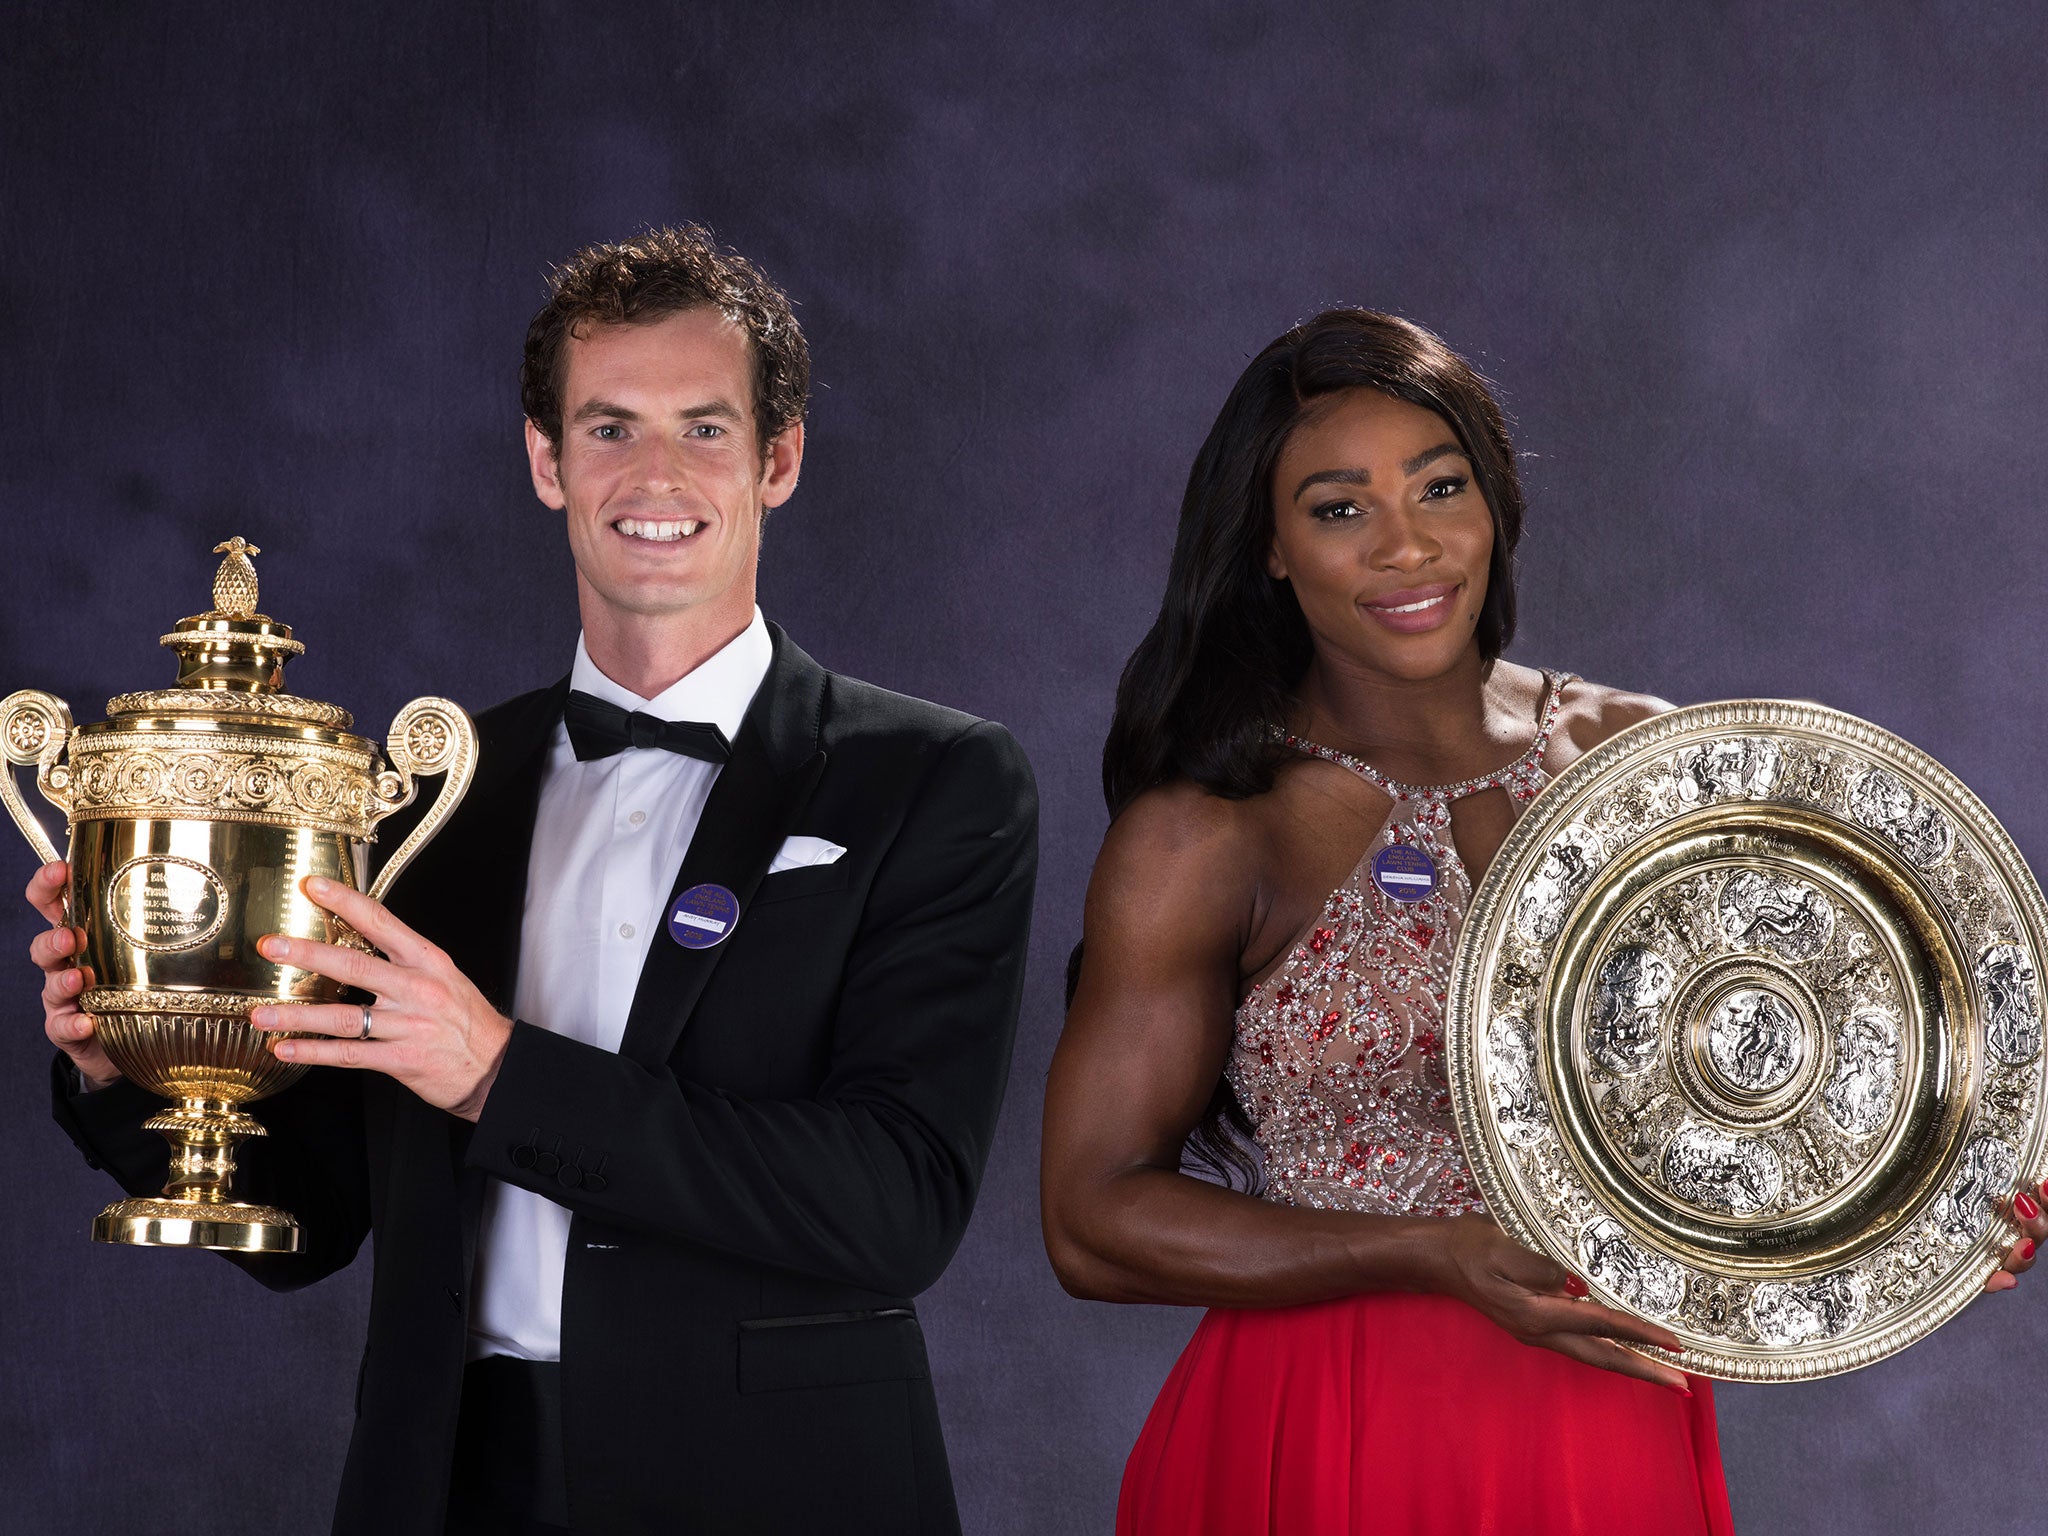 Murray and Williams with their Wimbledon silverware